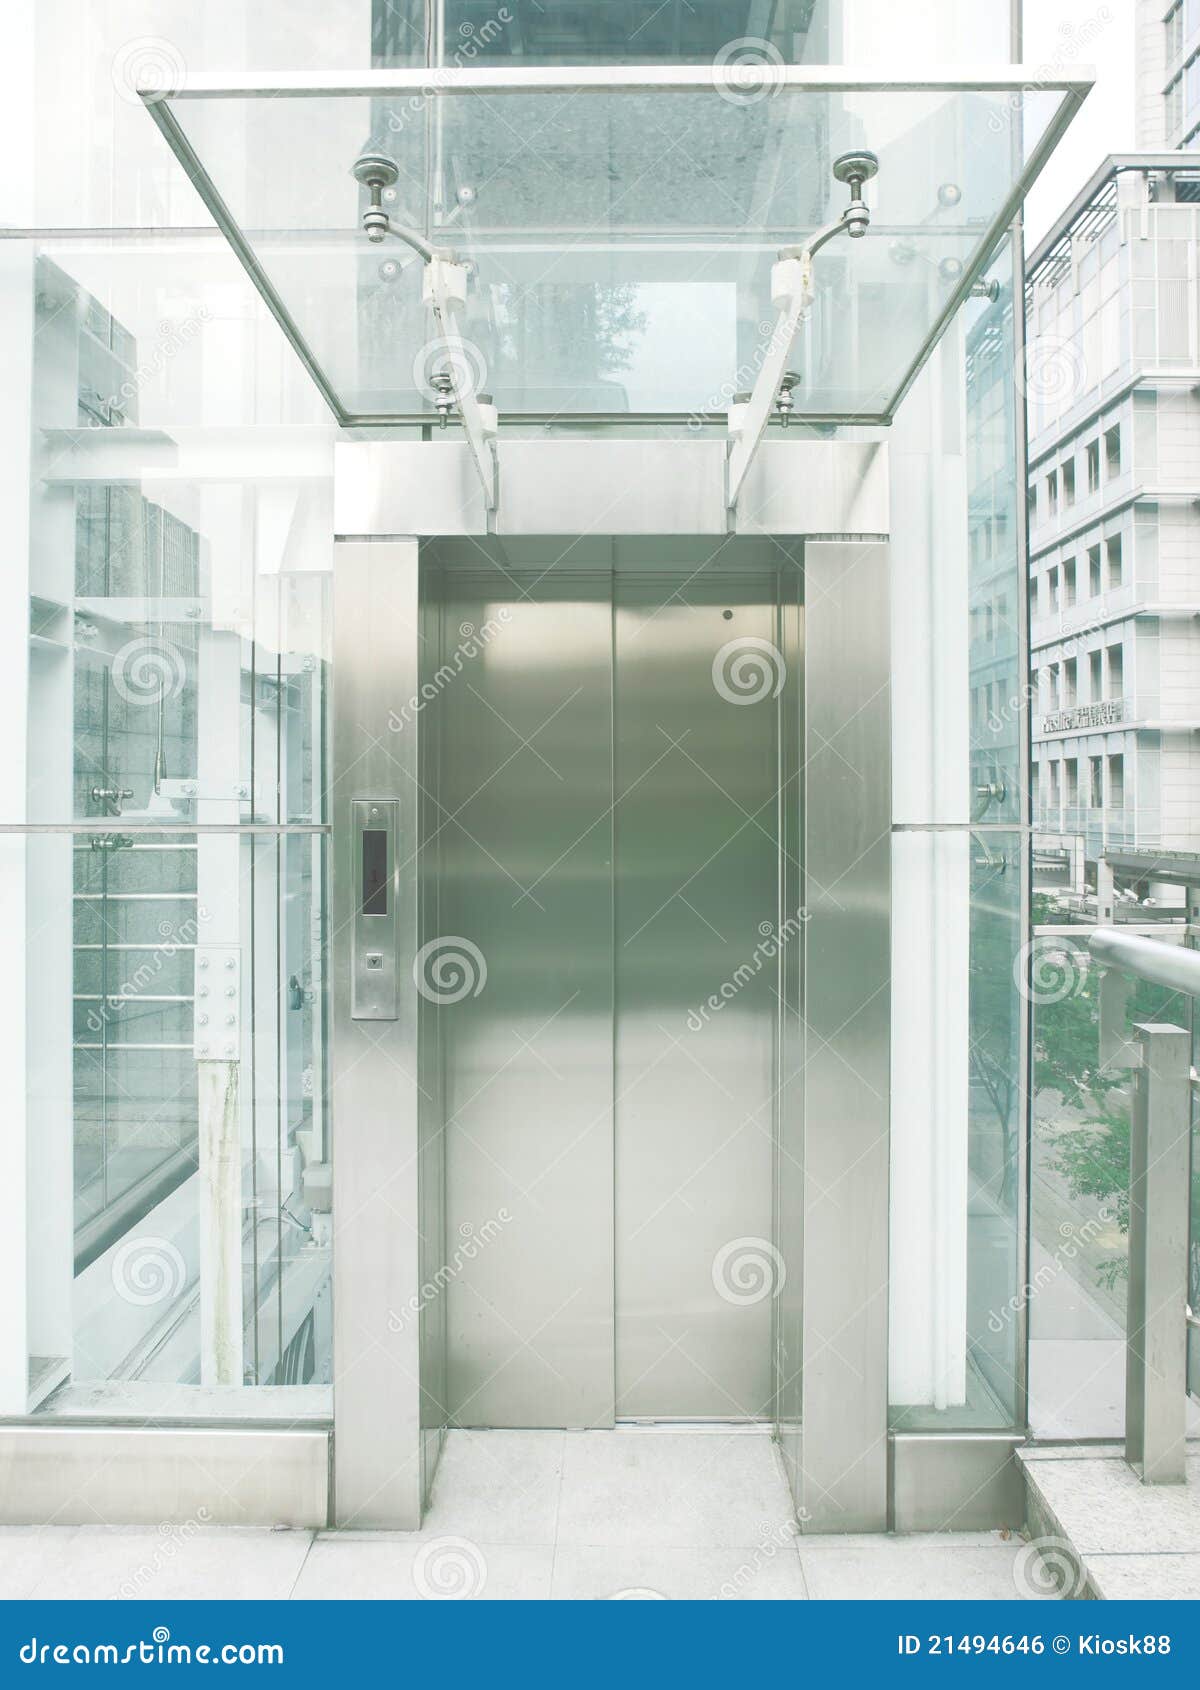 Outdoor Transparent Elevator Stock Photo Image of down, close 21494646